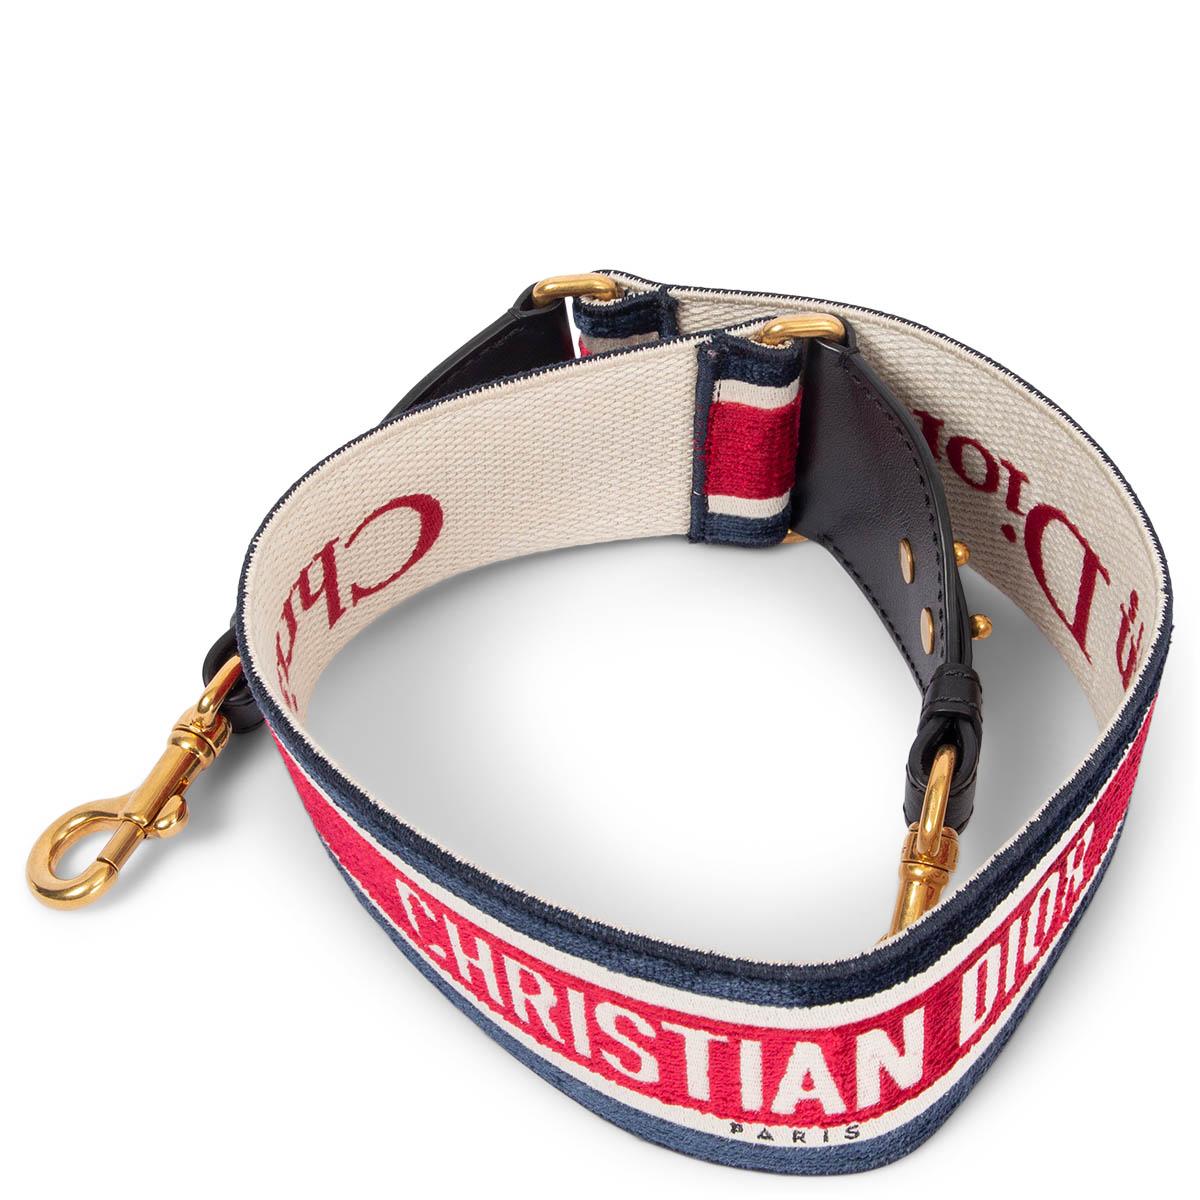 100% authentic Christian Dior bag strap in red, navy and off-white velvet and canvas featuring gold-tone clasps with black leather trimming. Has been carried and is in excellent condition. 

2021 Fall/Winter

Measurements
Width	6.5cm